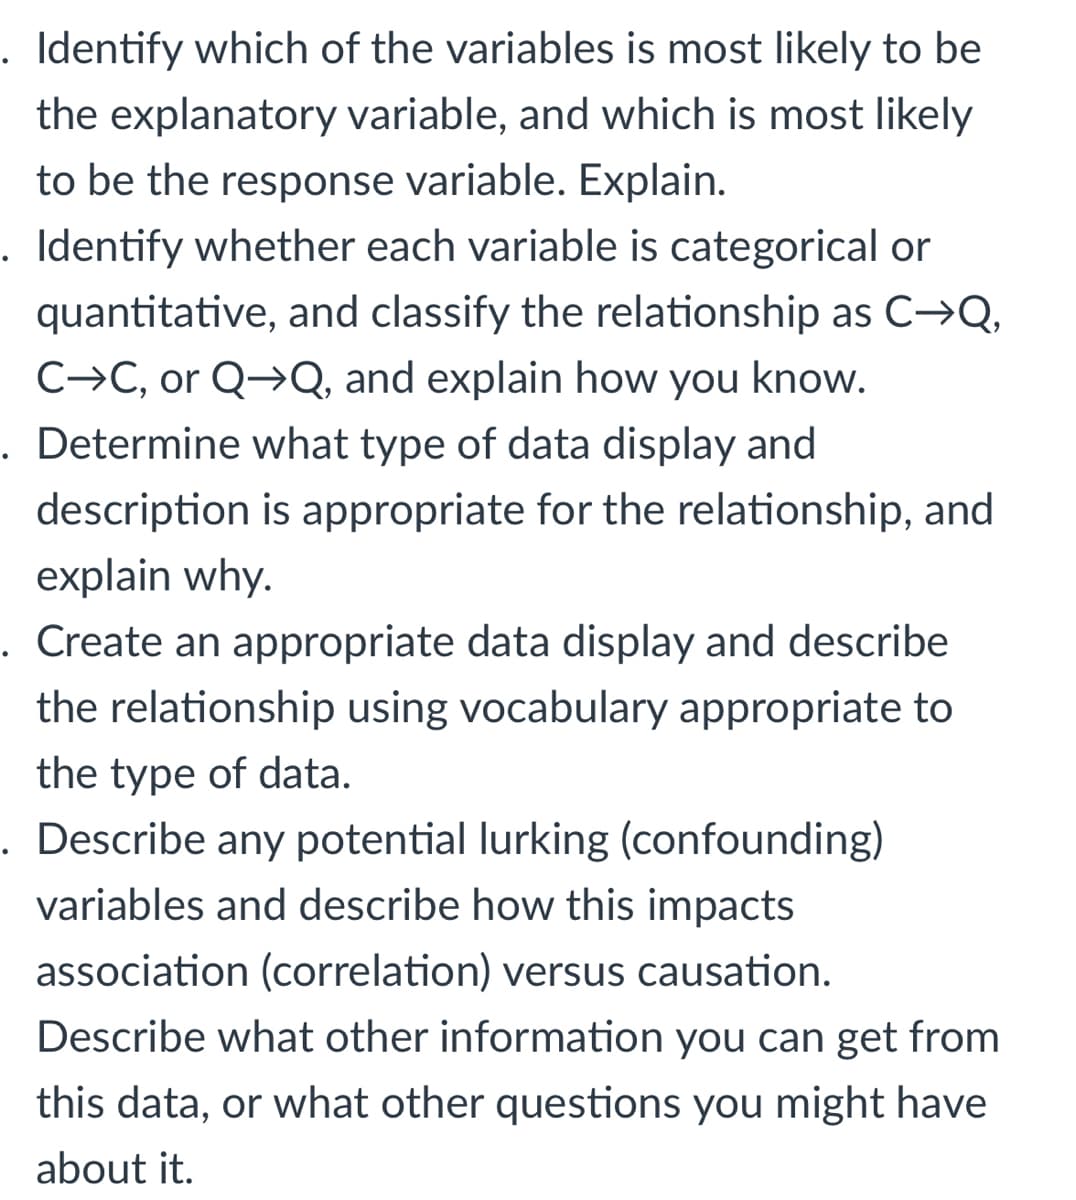 Identify which of the variables is most likely to be
the explanatory variable, and which is most likely
to be the response variable. Explain.
. Identify whether each variable is categorical or
quantitative, and classify the relationship as C→Q,
C→C, or Q→Q, and explain how you know.
. Determine what type of data display and
description is appropriate for the relationship, and
explain why.
. Create an appropriate data display and describe
the relationship using vocabulary appropriate to
the type of data.
. Describe any potential lurking (confounding)
variables and describe how this impacts
association (correlation) versus causation.
Describe what other information you can get from
this data, or what other questions you might have
about it.